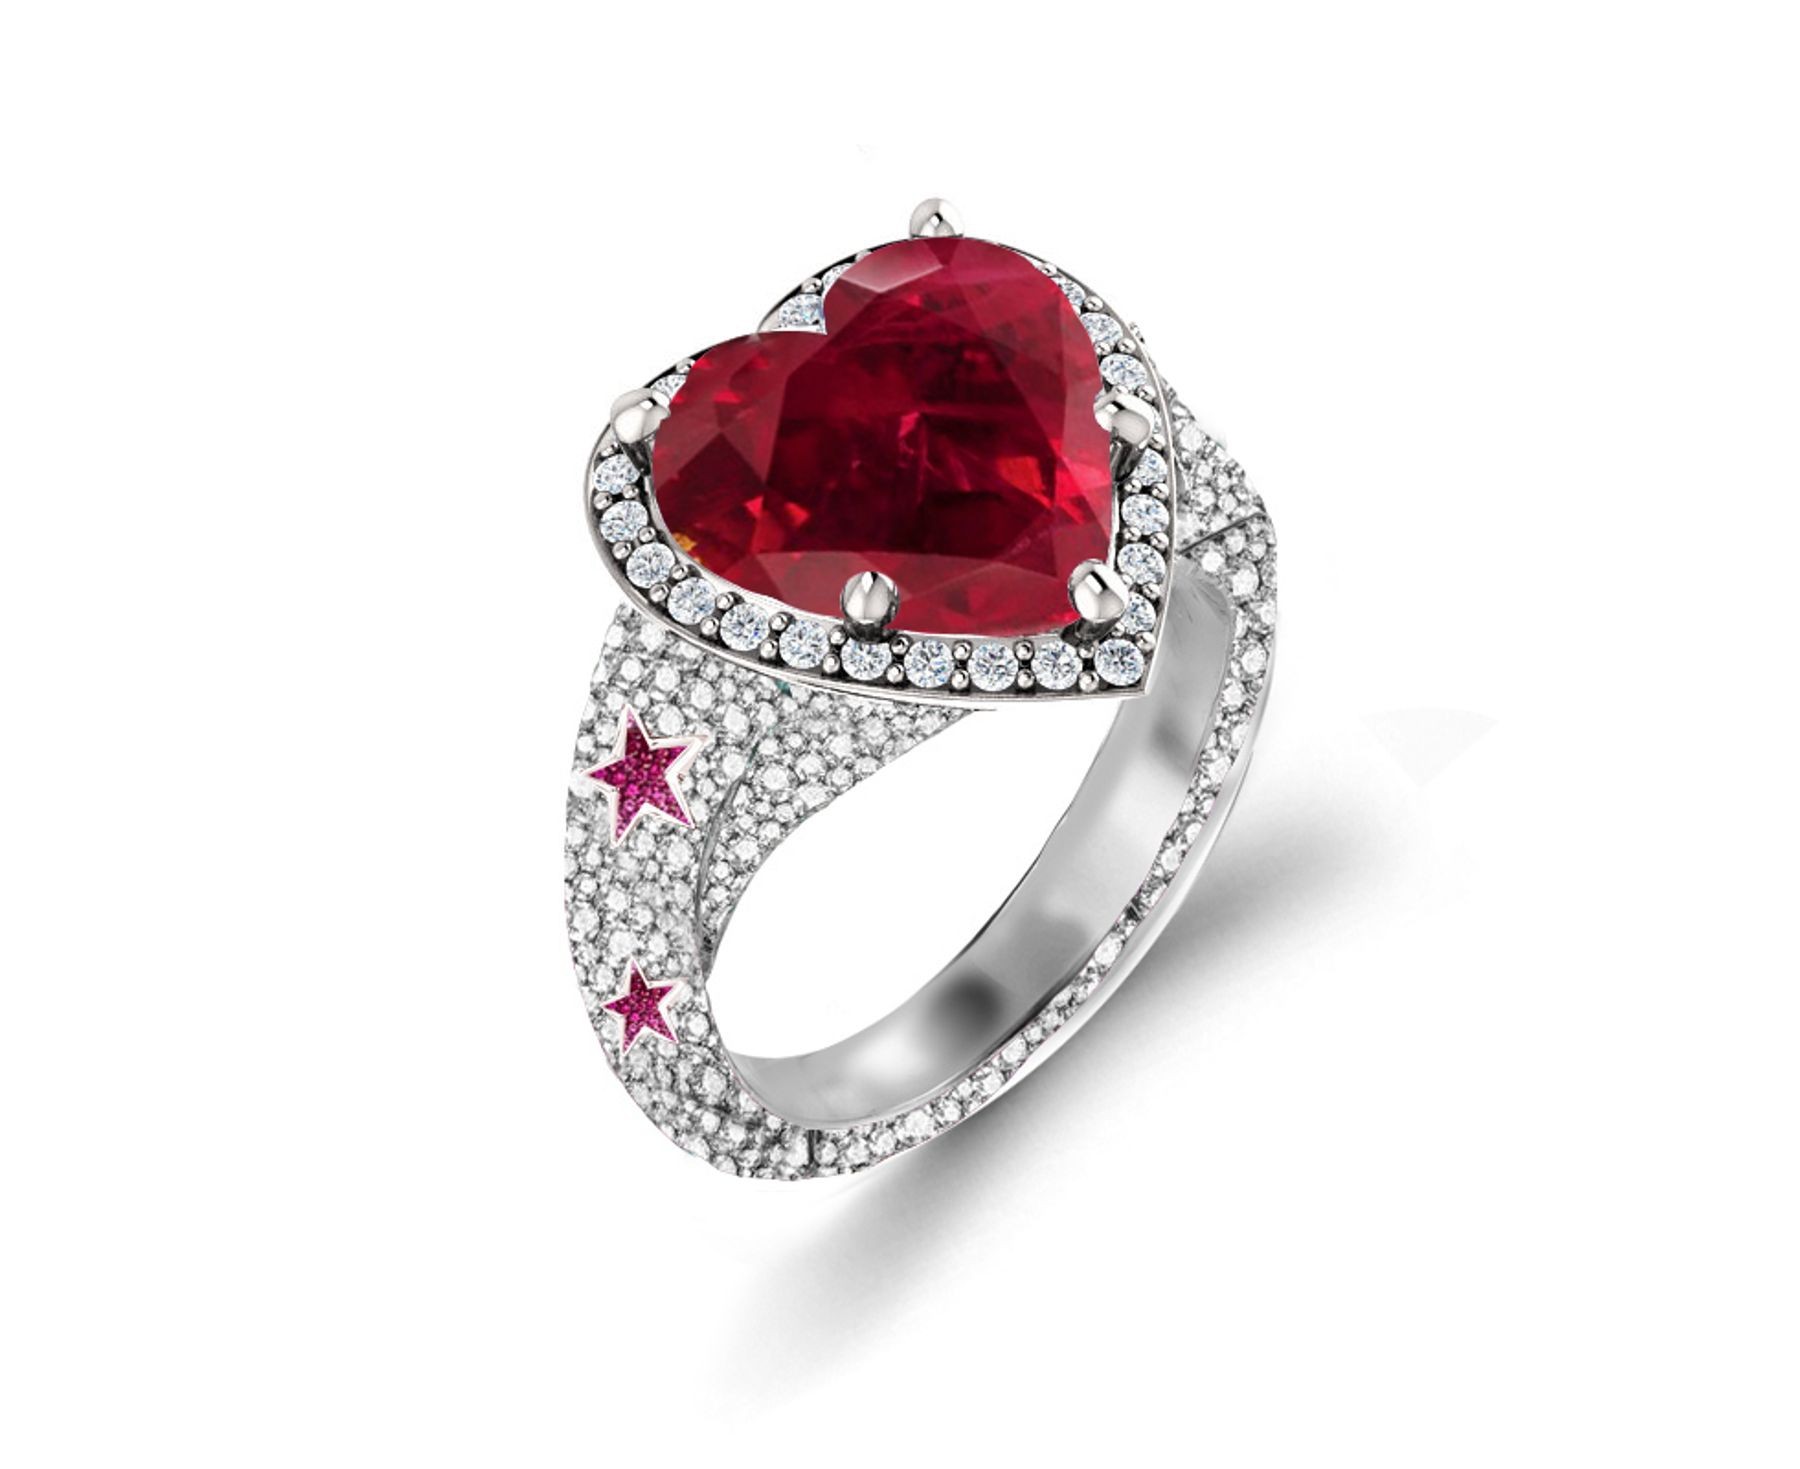 Delicate French Micro Pave Star Rings Featuring Vivid Red Rubies & Sparkling Diamonds